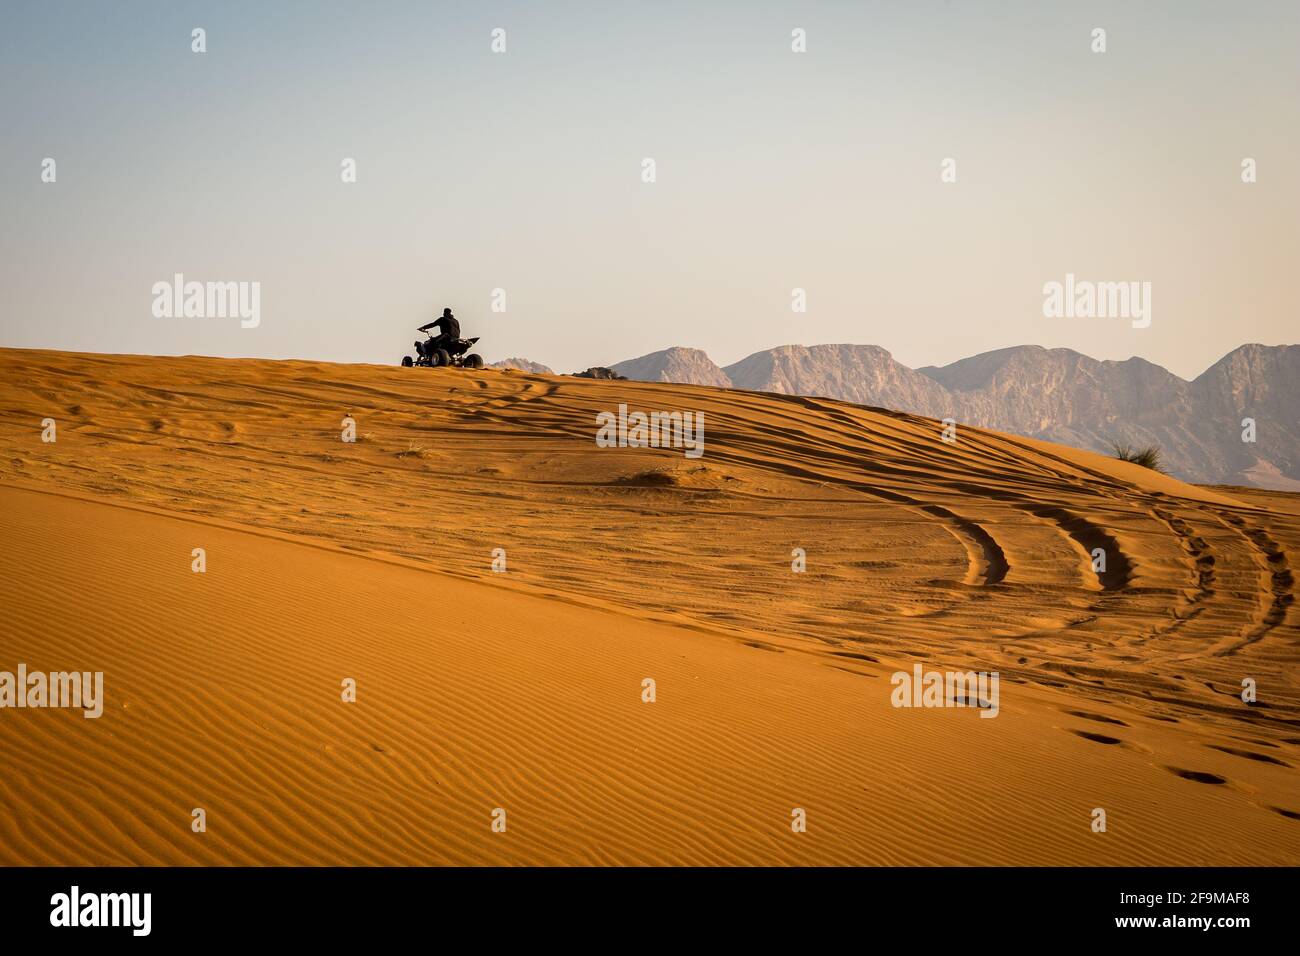 Silhouette of a quad driving up the sand dune in the desert, with tire tracks behind and mountains in the background, sunset, Fossil Rock, Sharjah, Un Stock Photo